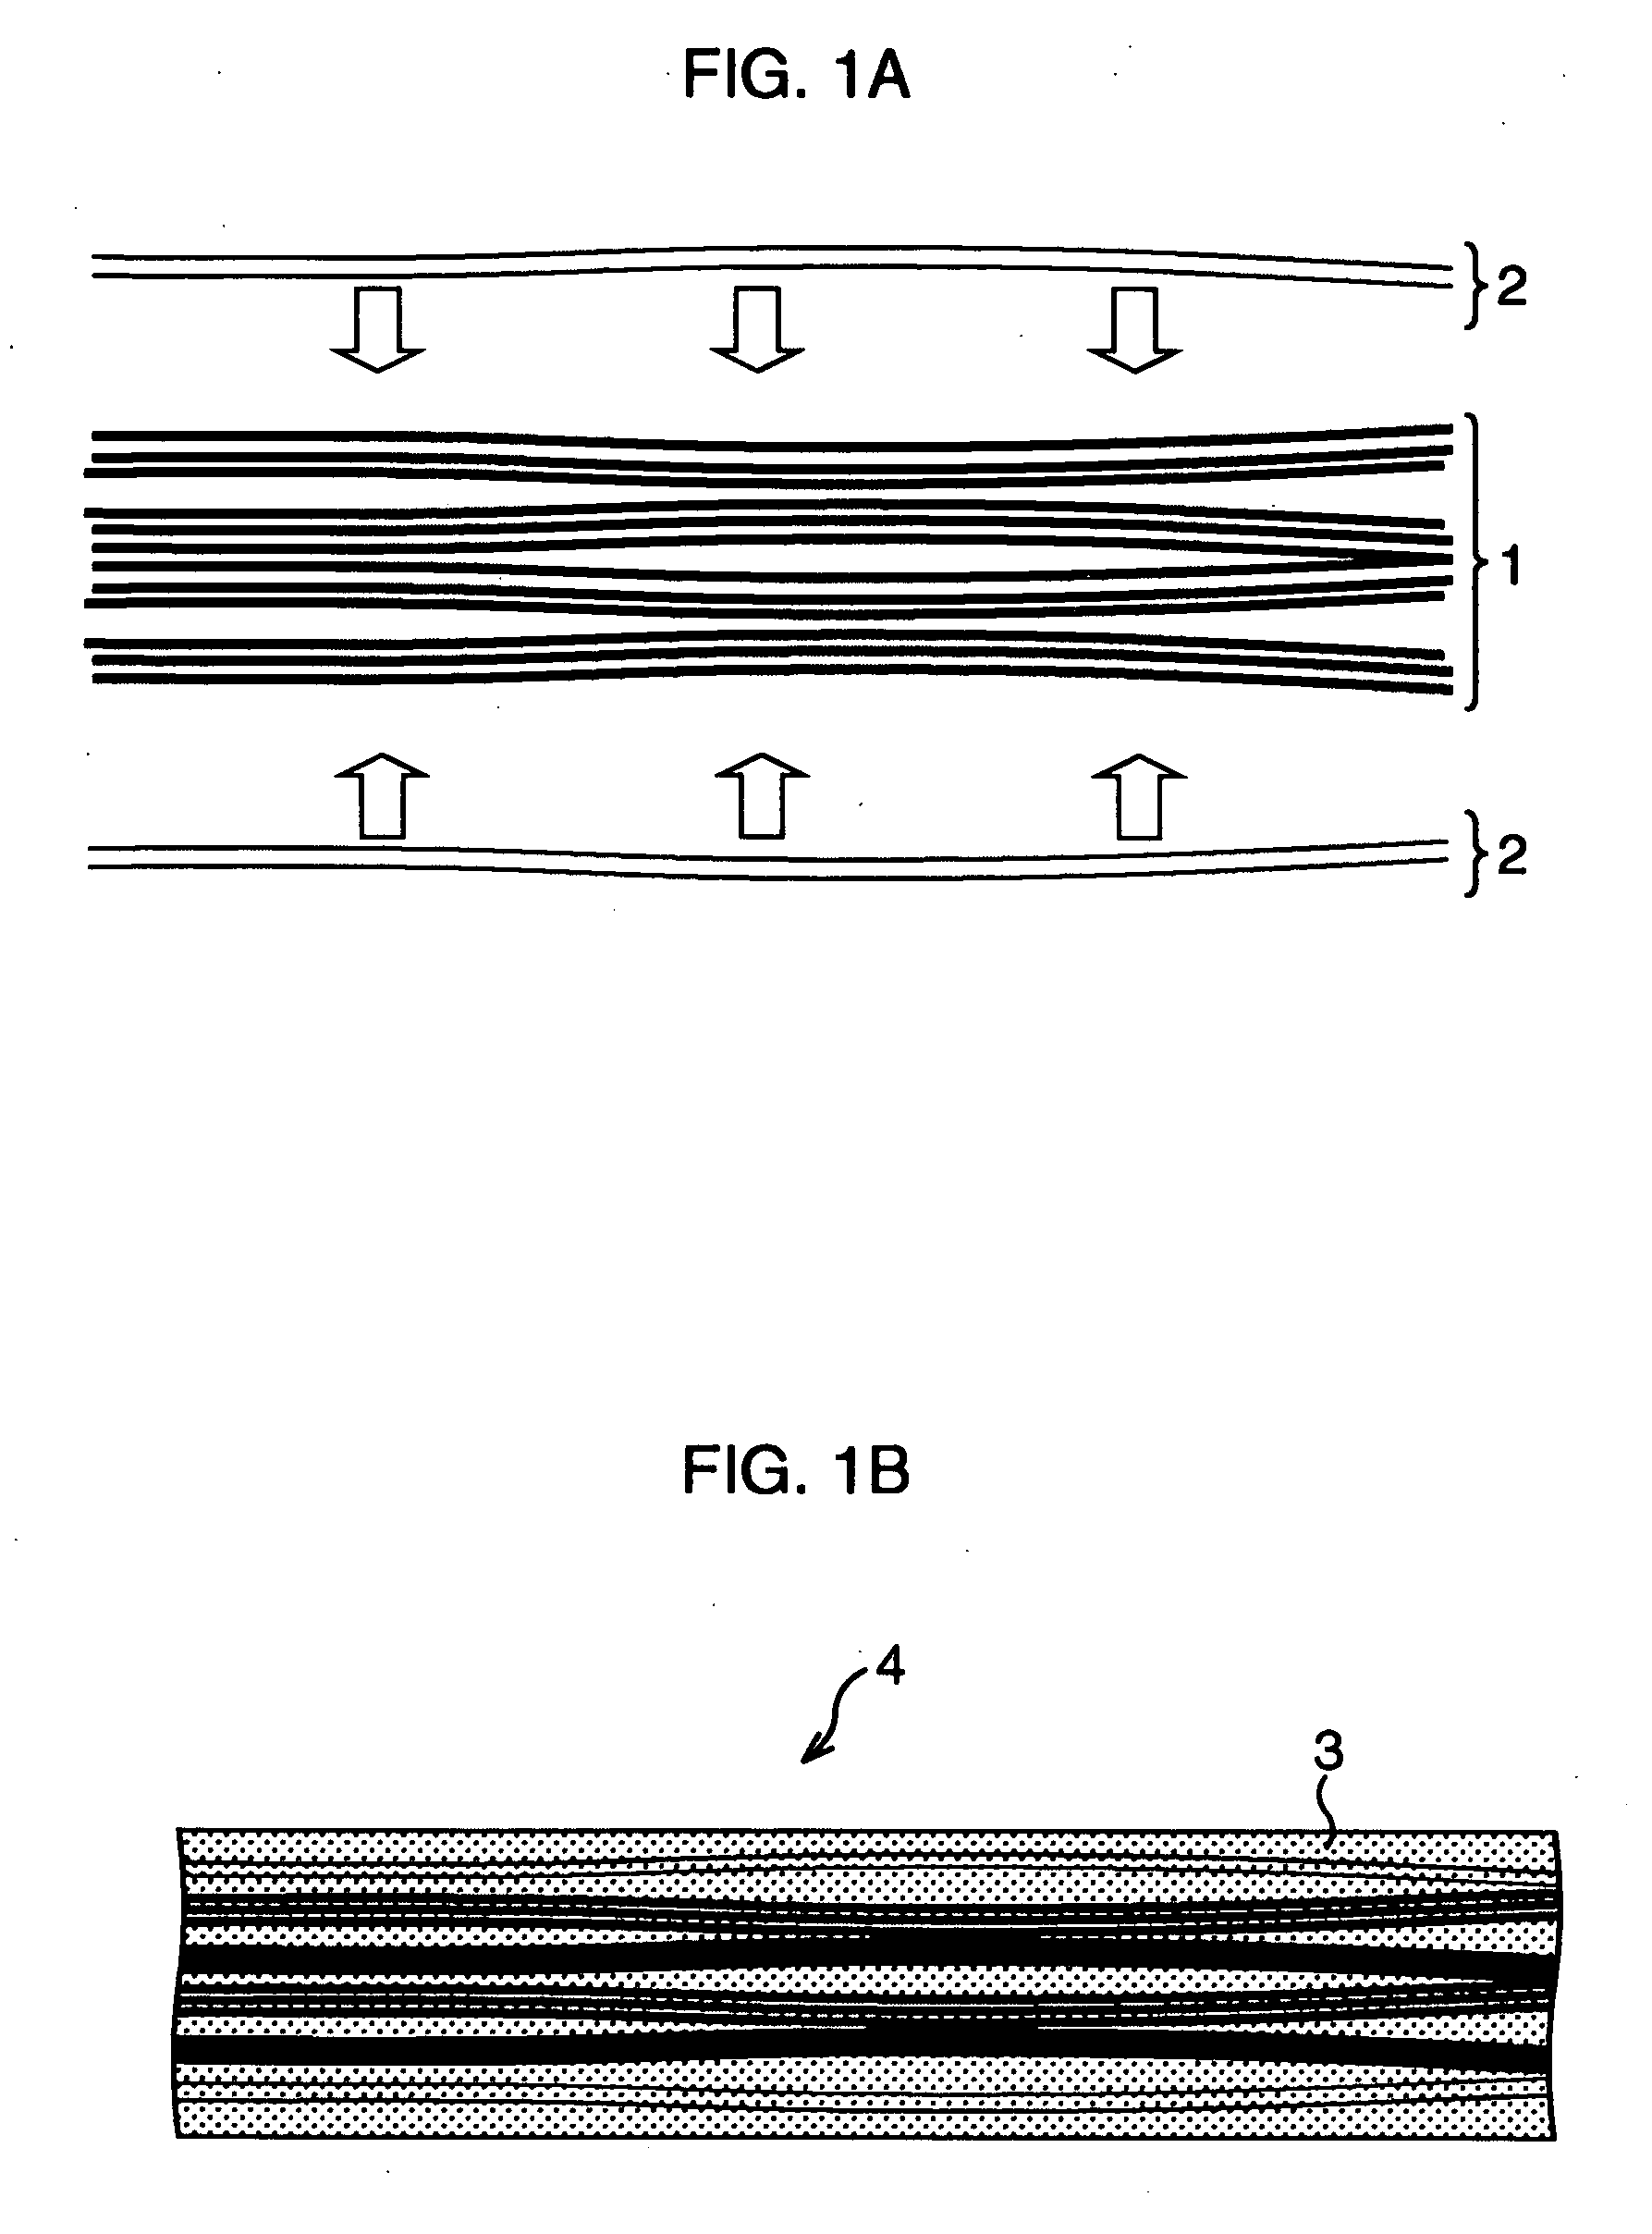 Multilevel interconnection board and method of fabricating the same